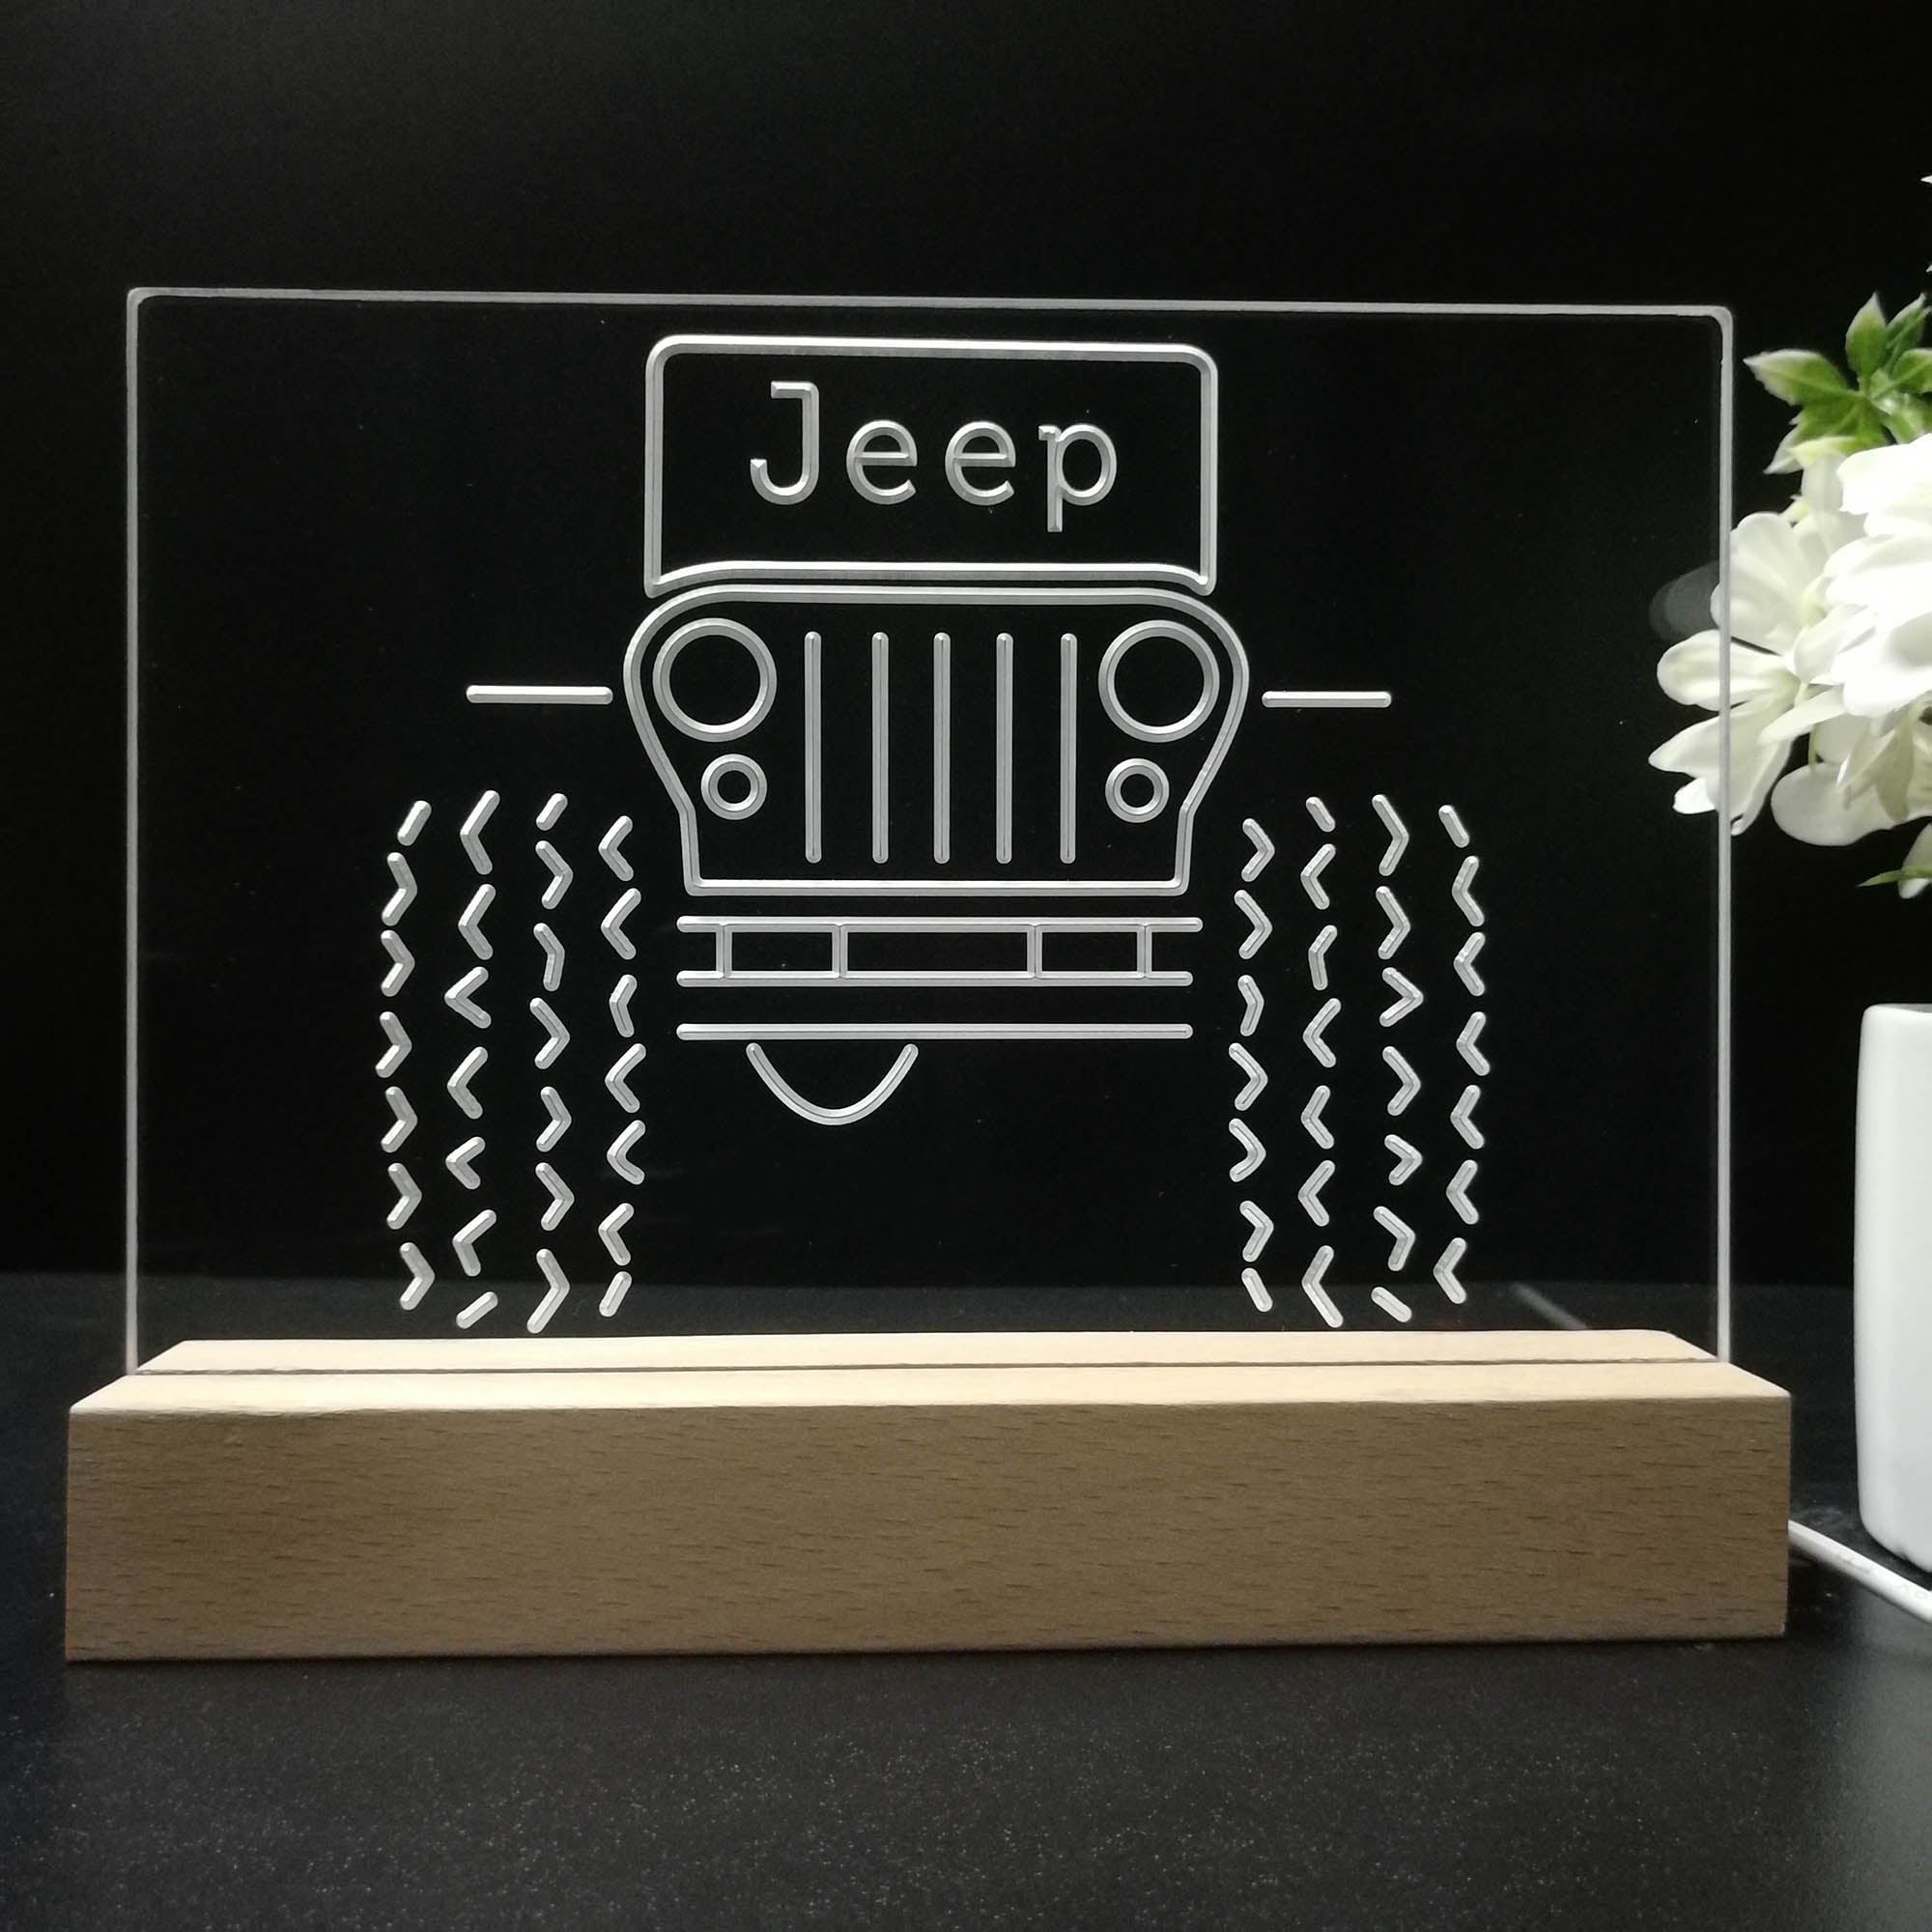 Only in a Jeep Truck Garage 3D LED Illusion Night Light